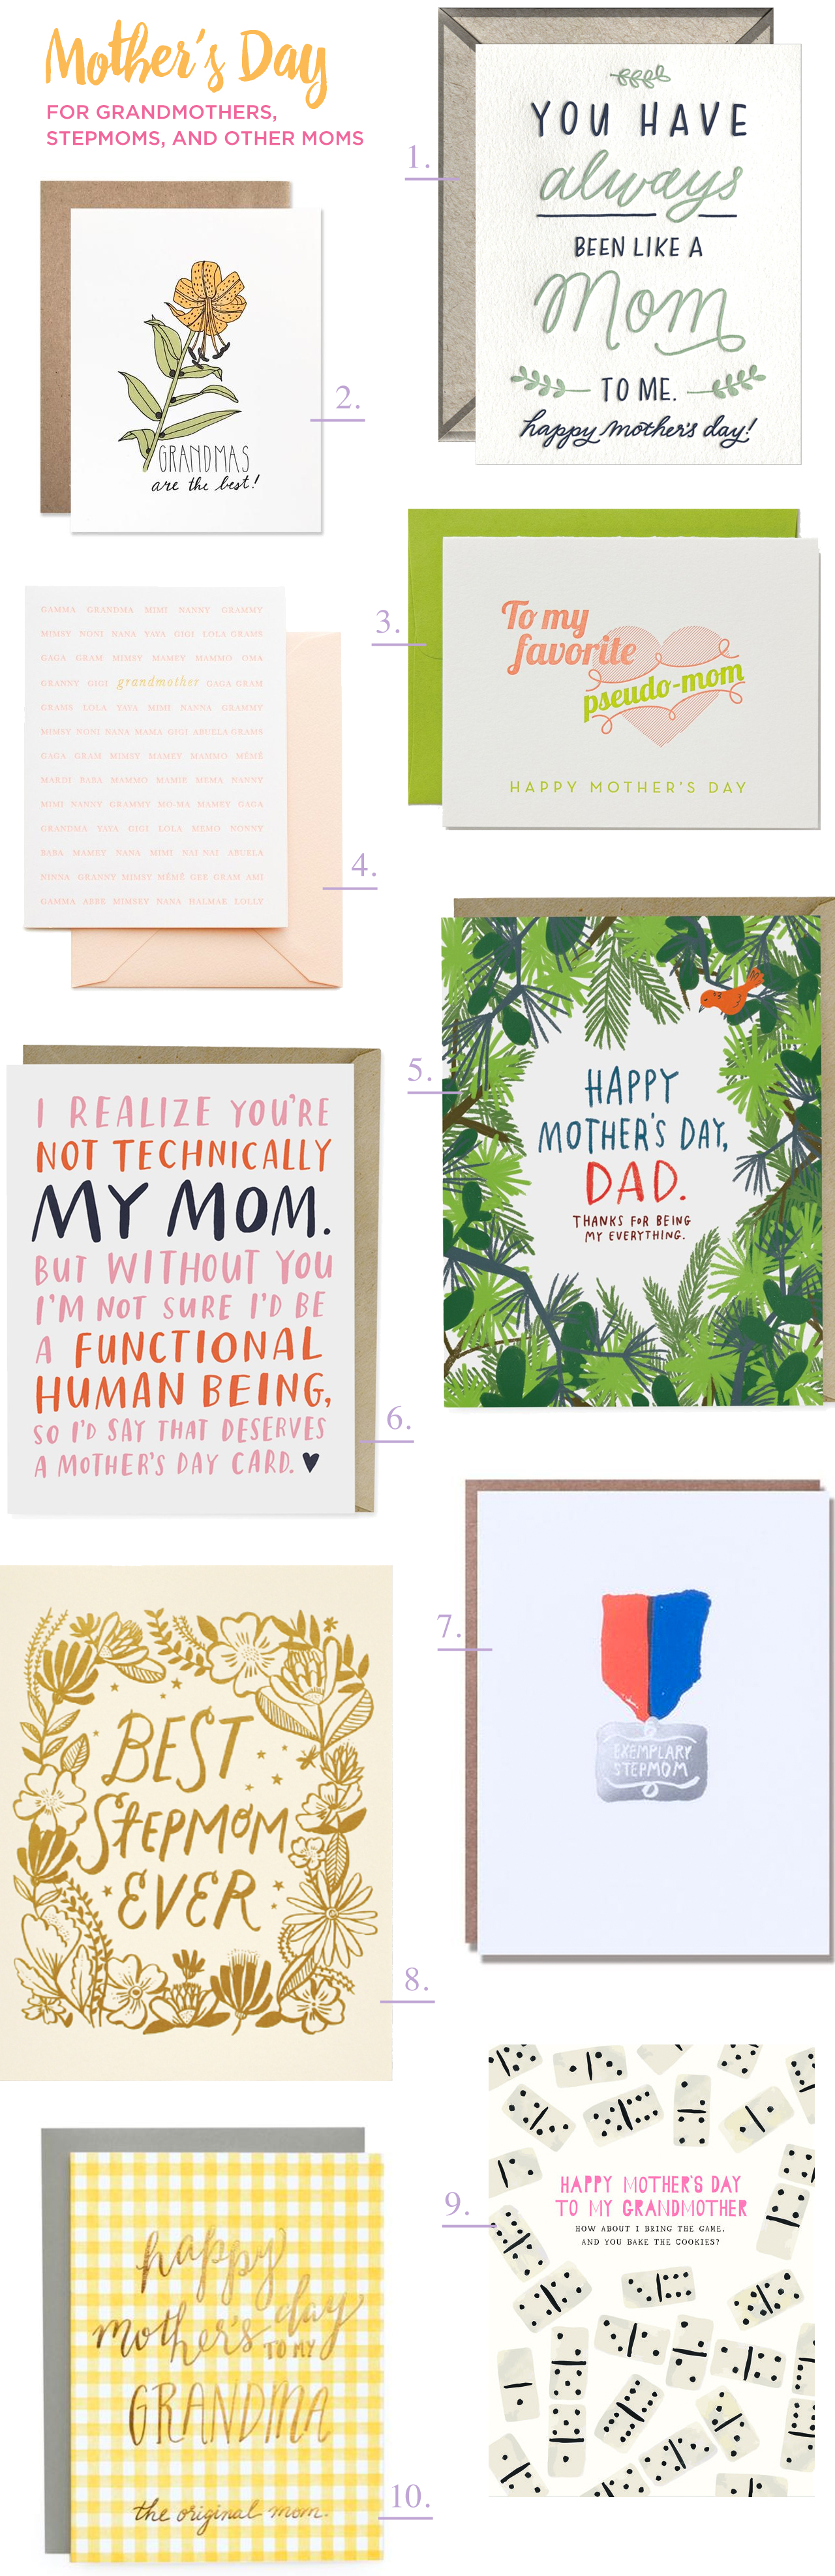 Mother's Day Cards for Grandmothers, Step-Moms, and Other Moms